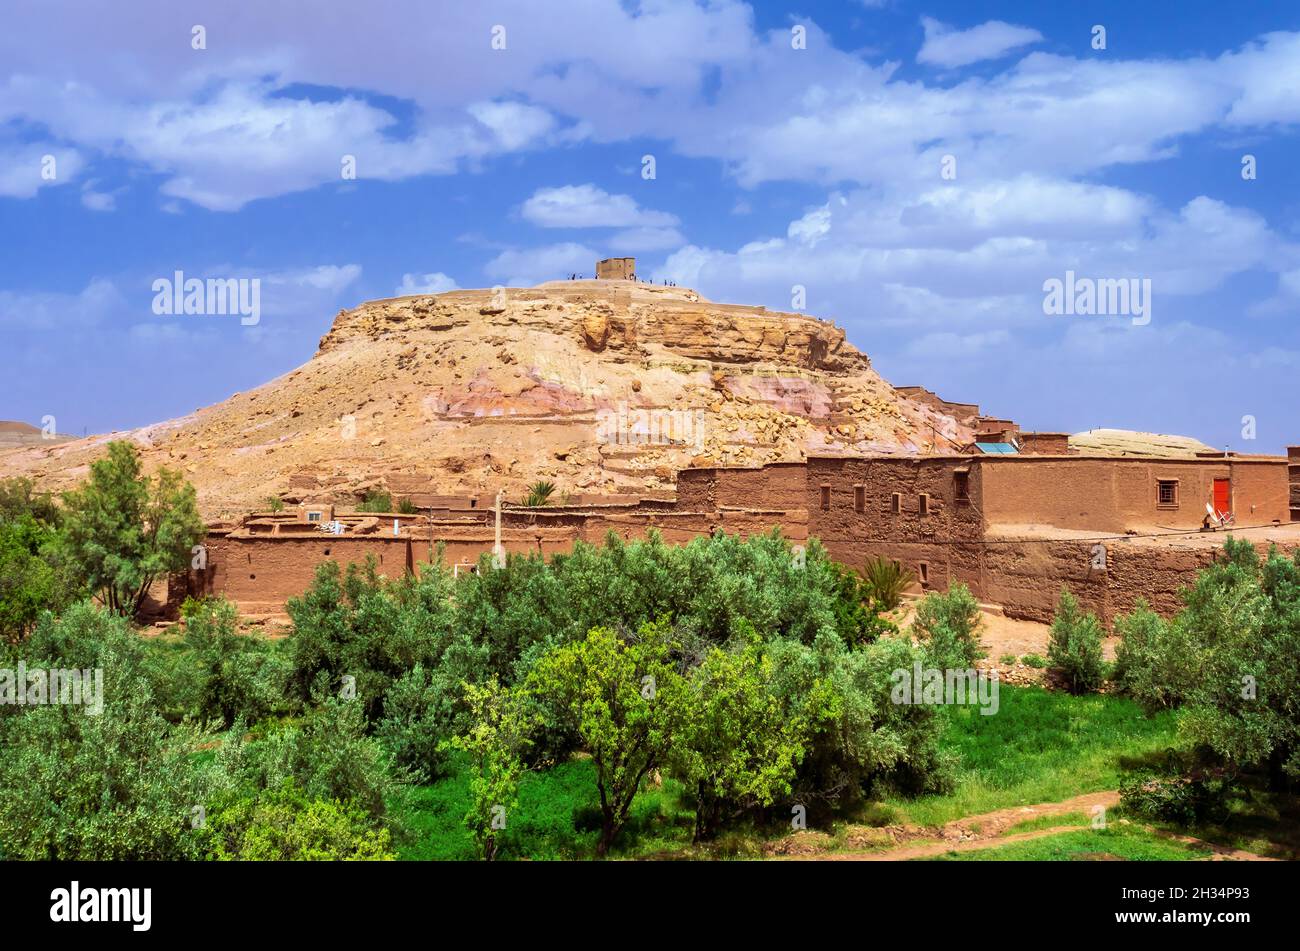 Ouarzazate City, named 'The door of the desert' the most famous tourist destination in Morocco Stock Photo